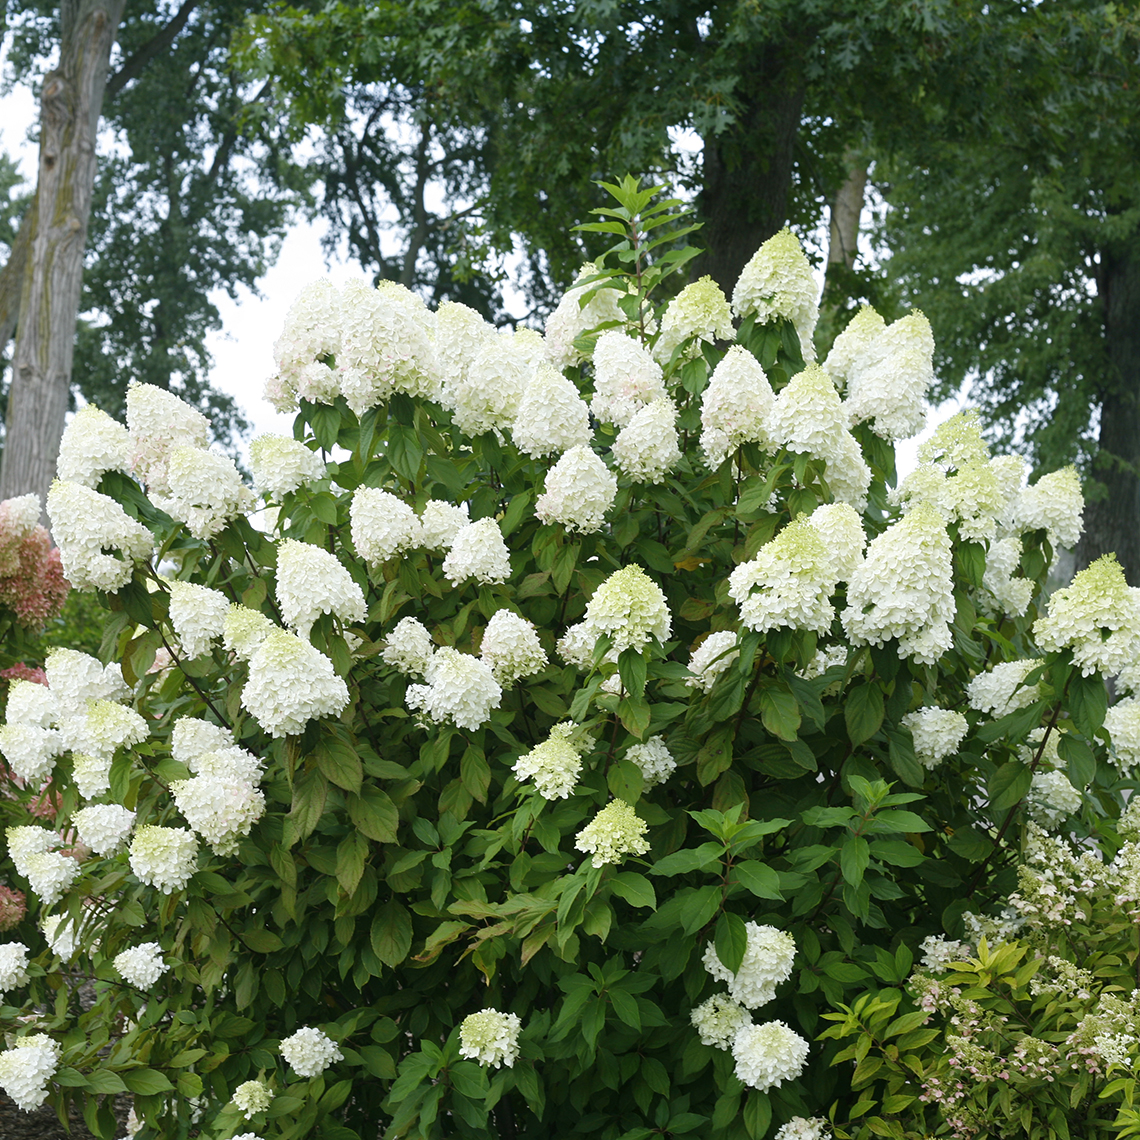 Pillow Talk panicle hydrangea in full bloom with white flowers before they take on the pink color